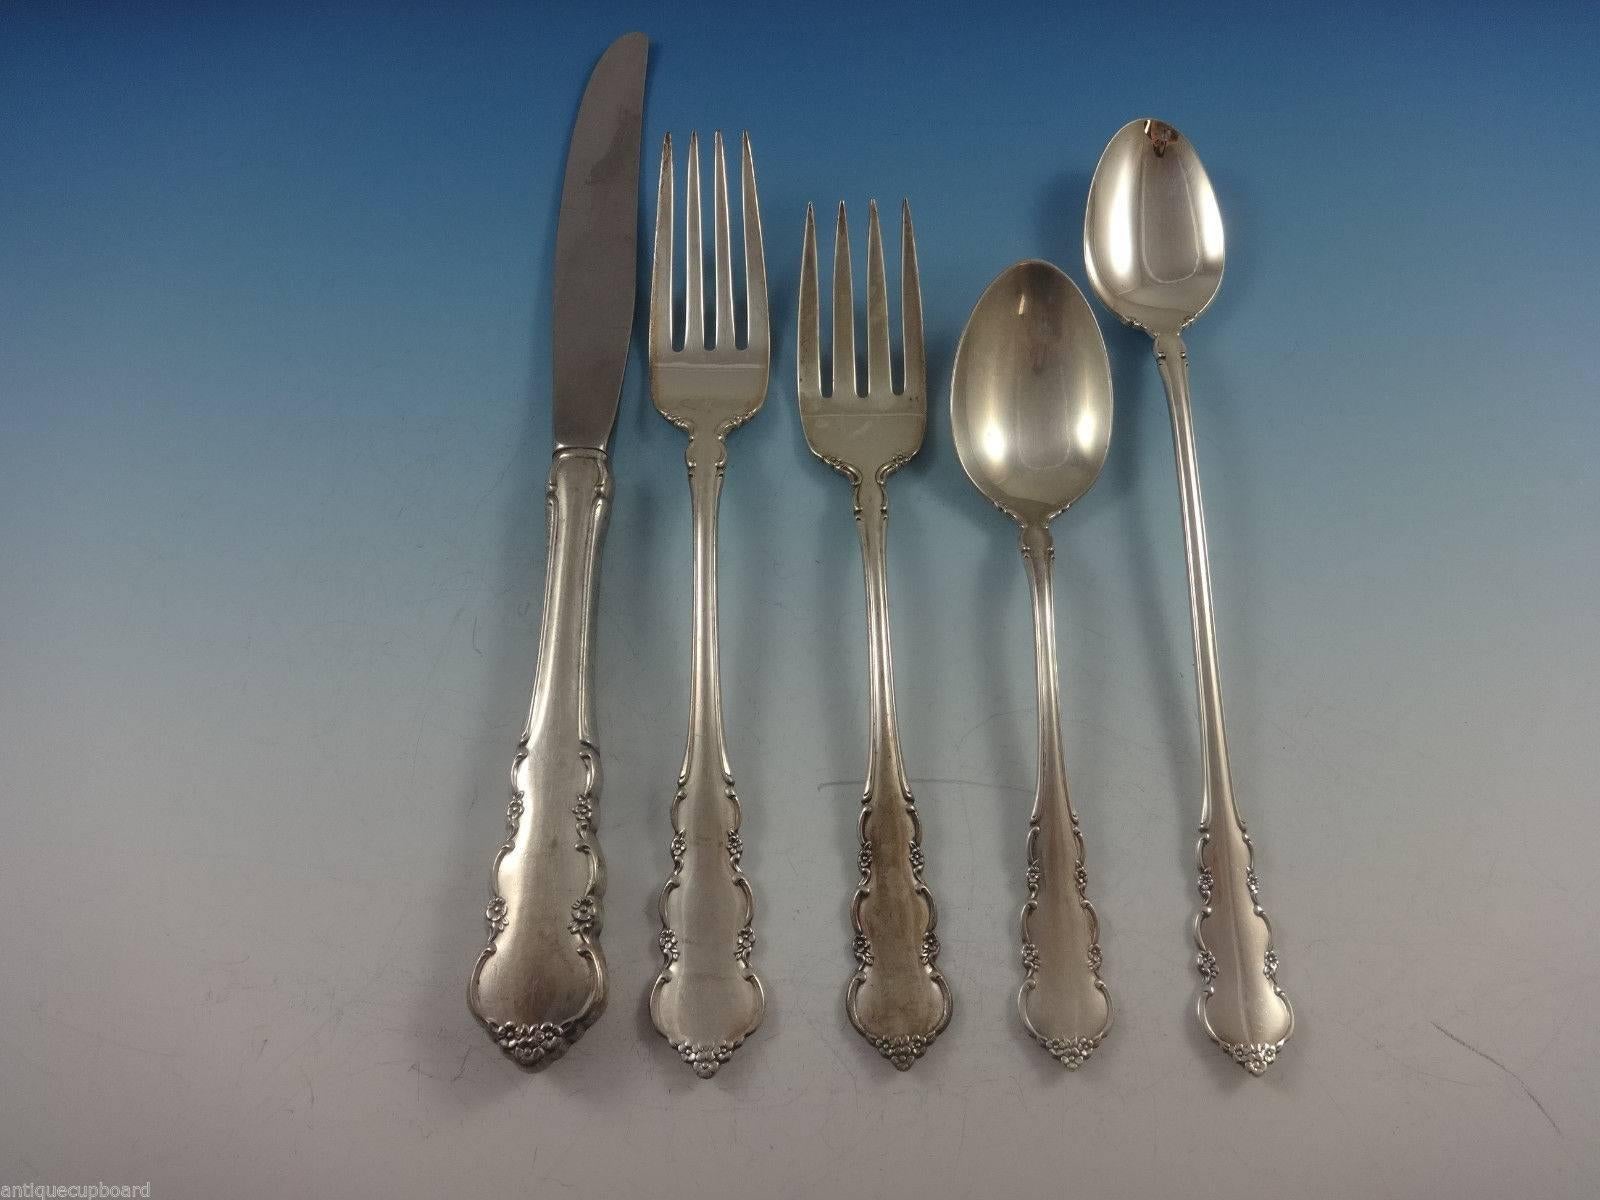 Beautifulc by Oneida Sterling Silver flatware set, 26 pieces. Great starter set! This set includes:

Six knives, 9